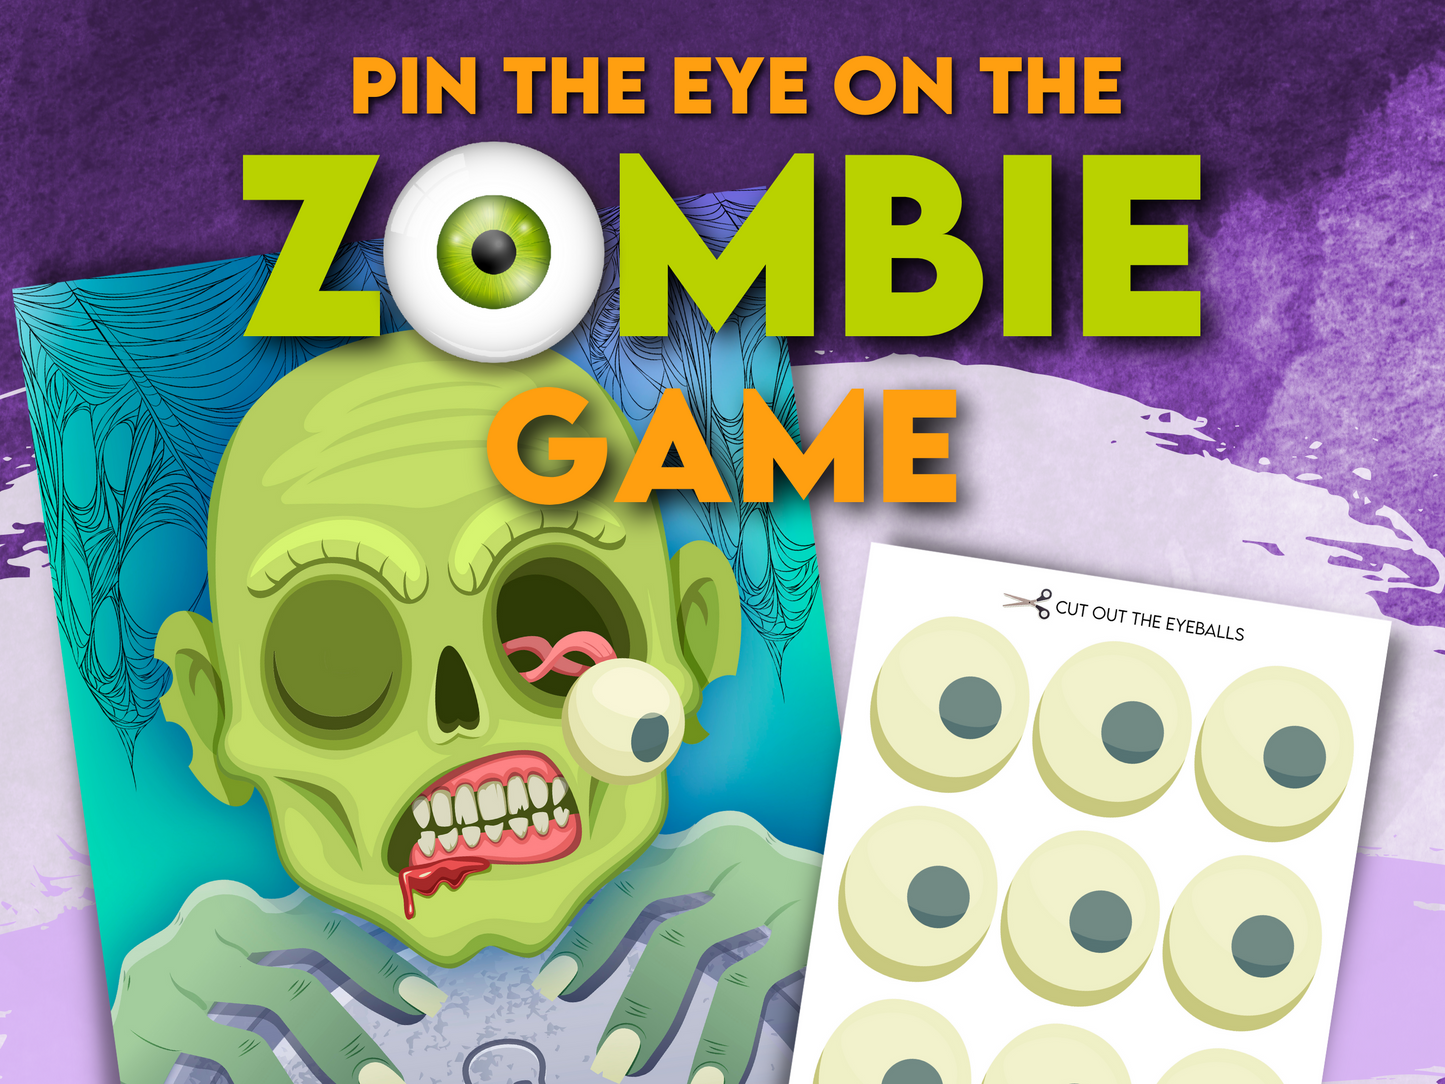 Pin the eye on the zombie